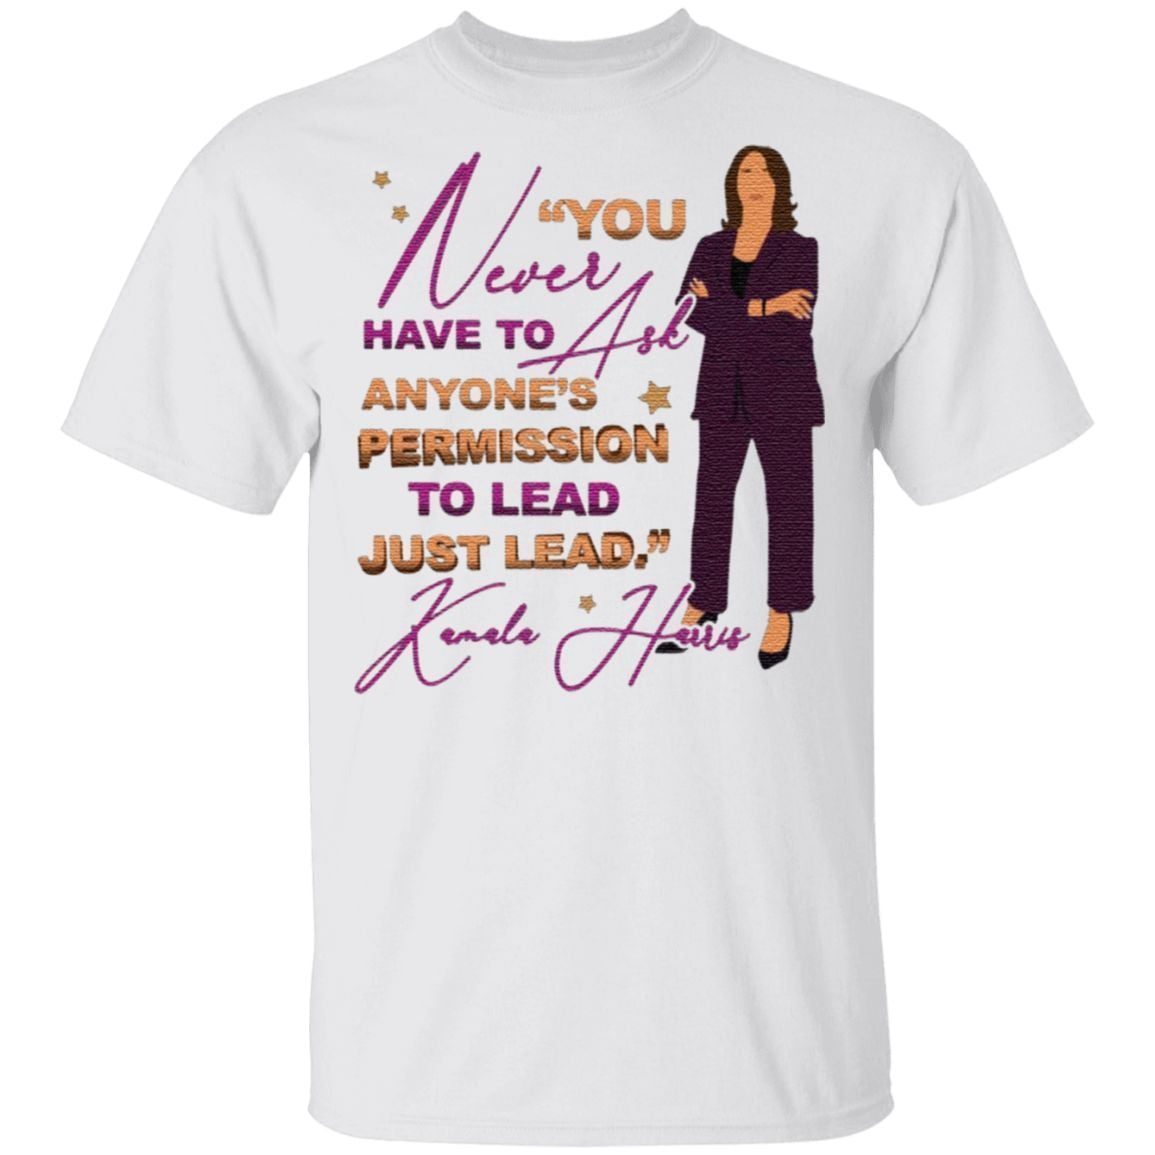 You Never Have to Ask Anyone’s Permission to Lead Just Lead Kamala 2020 T-Shirt